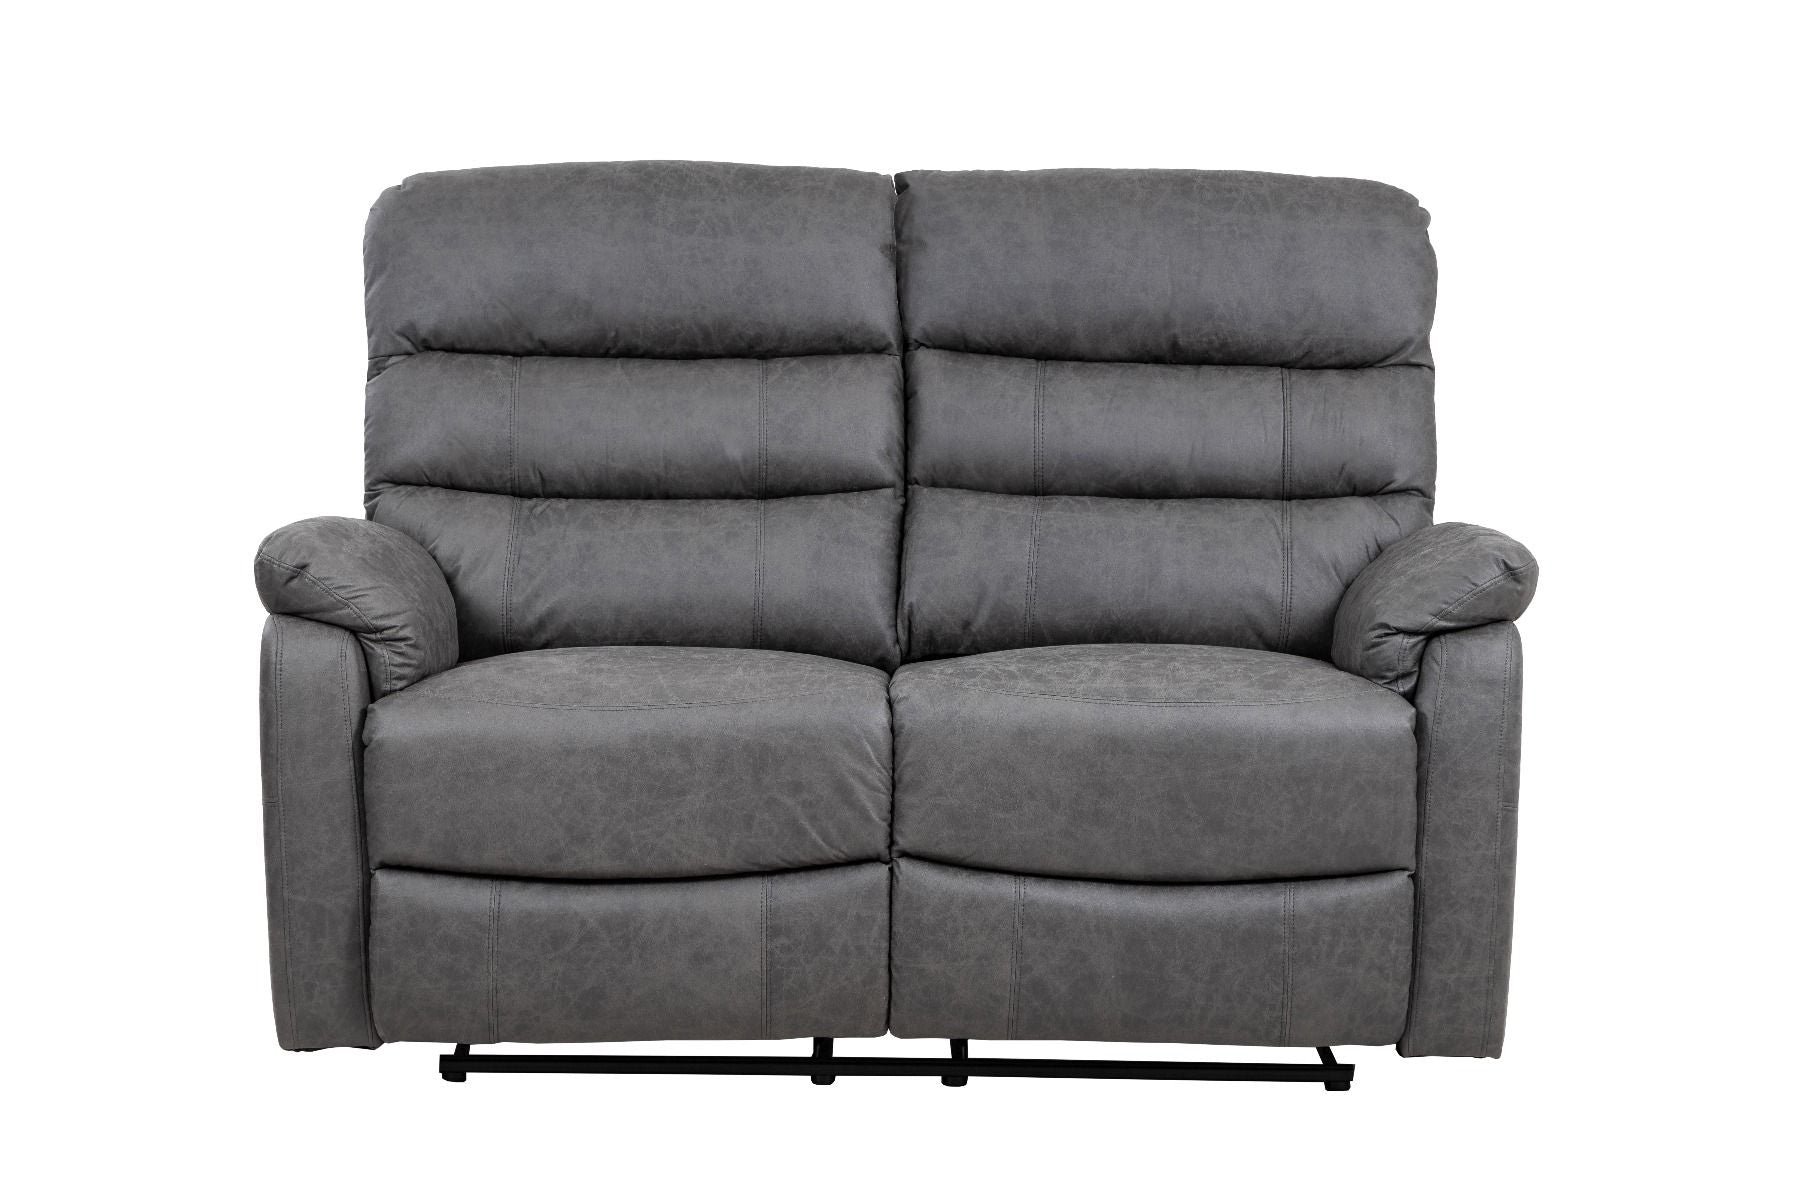 Taylor 2 Seater Recliner-Leather Air-Antique Grey Rub Off